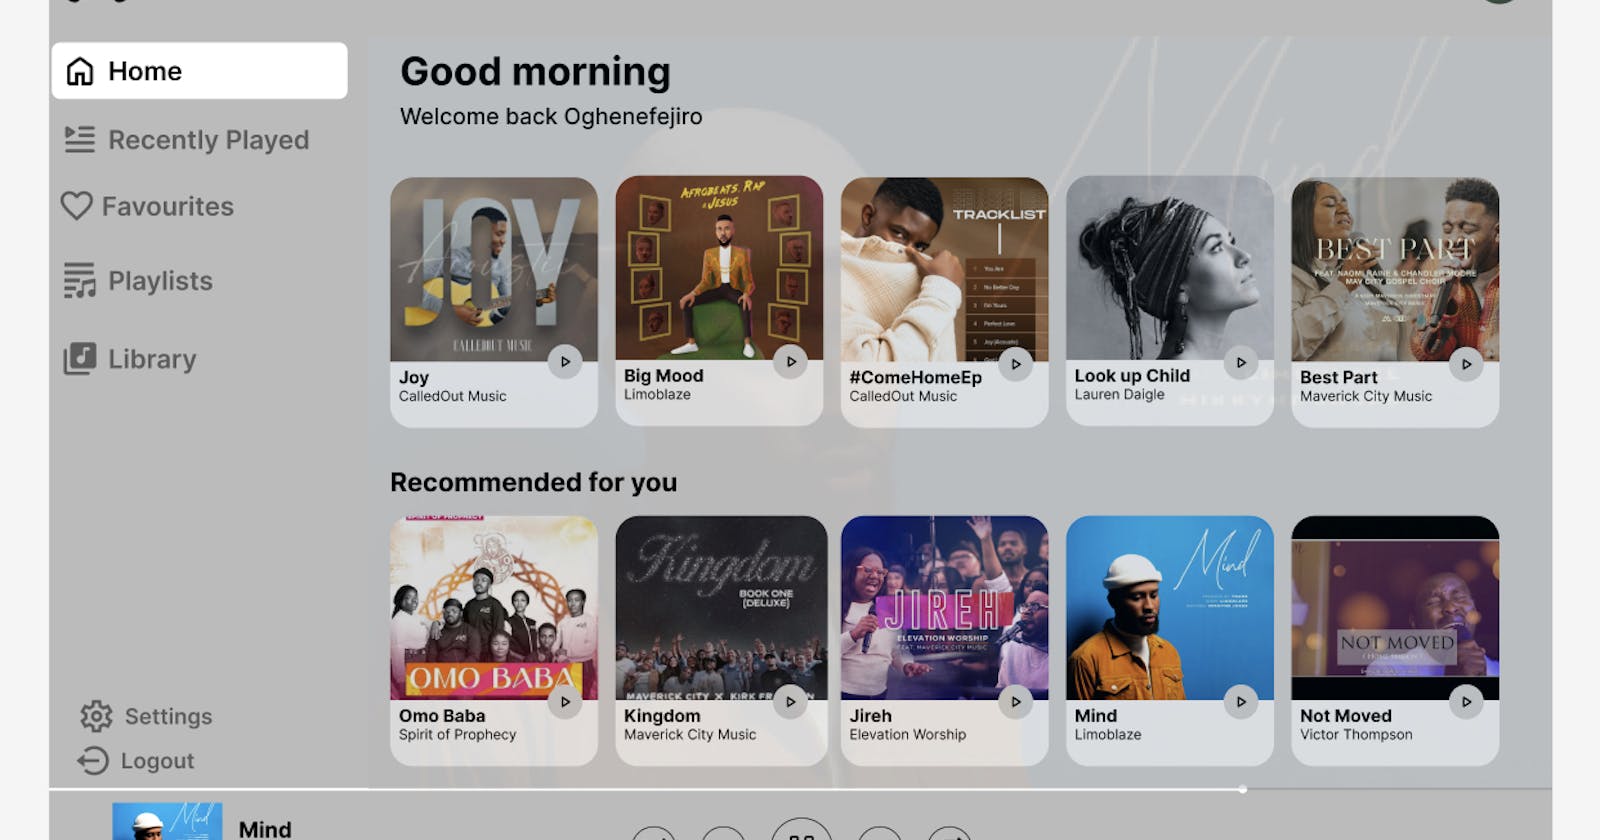 Task 1 (UI/UX) : The Music Player design